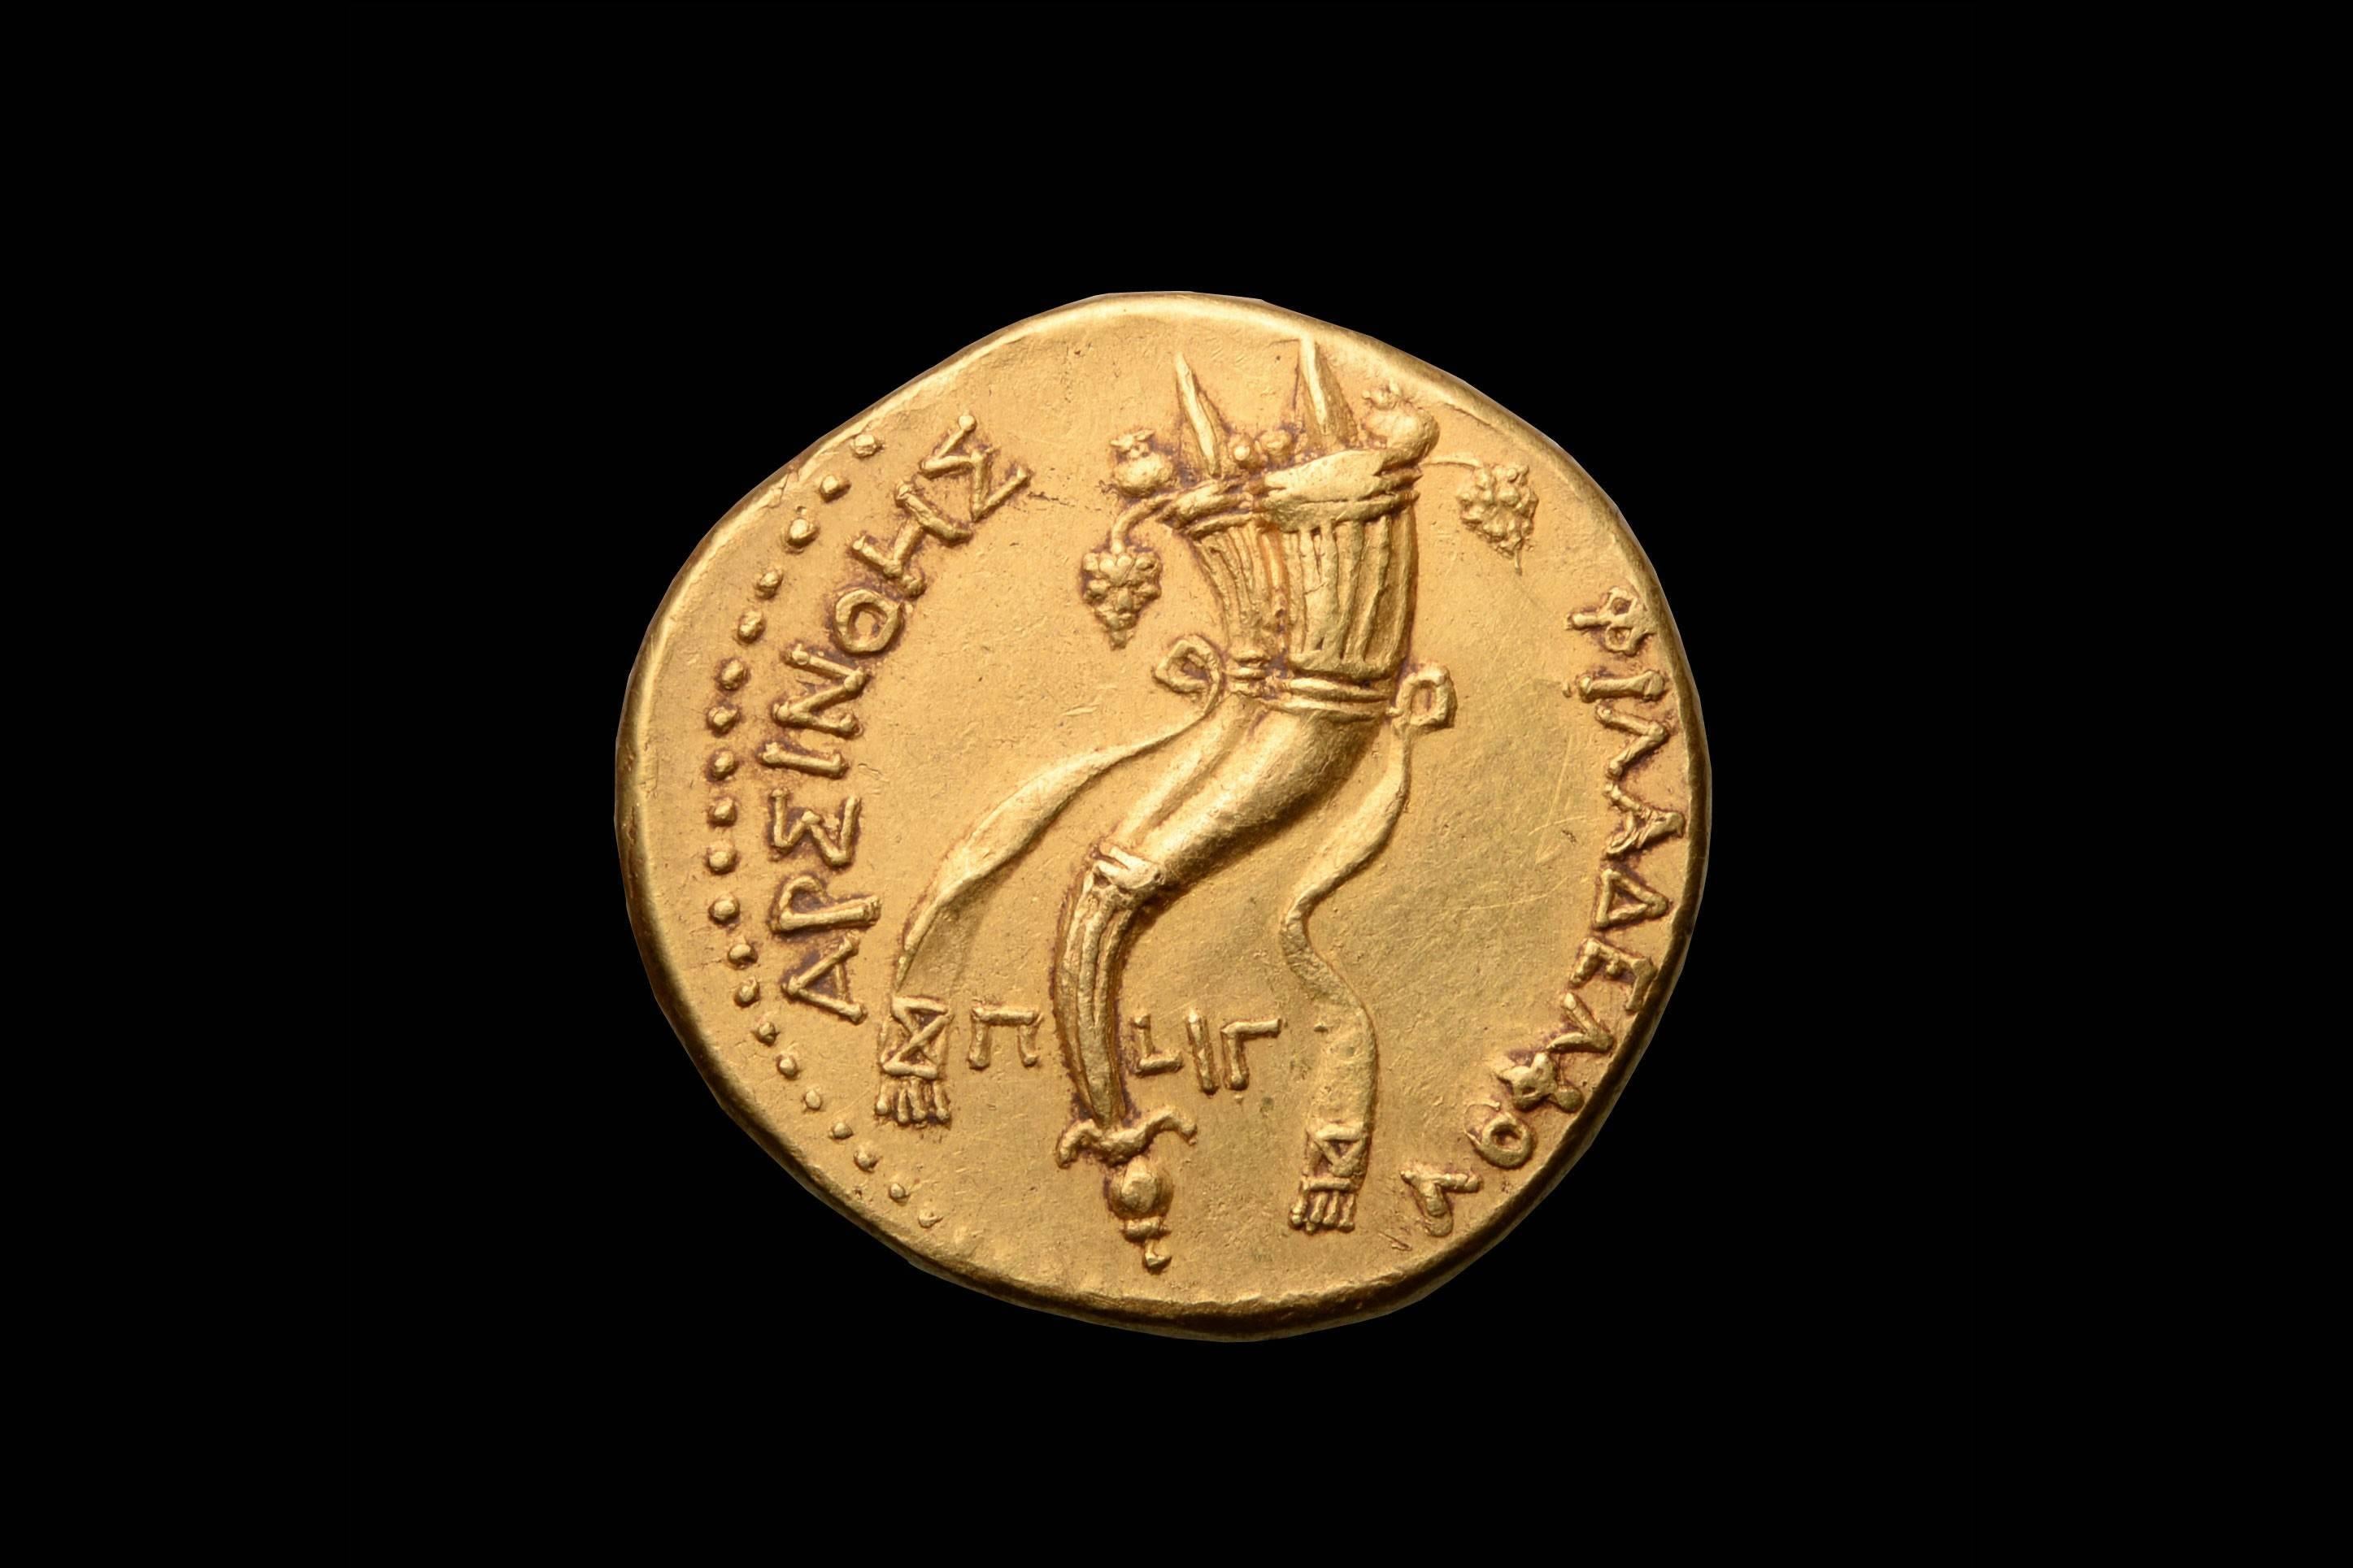 A unique, extremely fine, solid gold Octadrachm or Mnaïeion, the most valuable and heaviest gold coin struck in all antiquity. Minted around 253 BC by King Ptolemy II of Egypt in the honour of his Queen, Arsinoe II Philadelphus.
 
The obverse